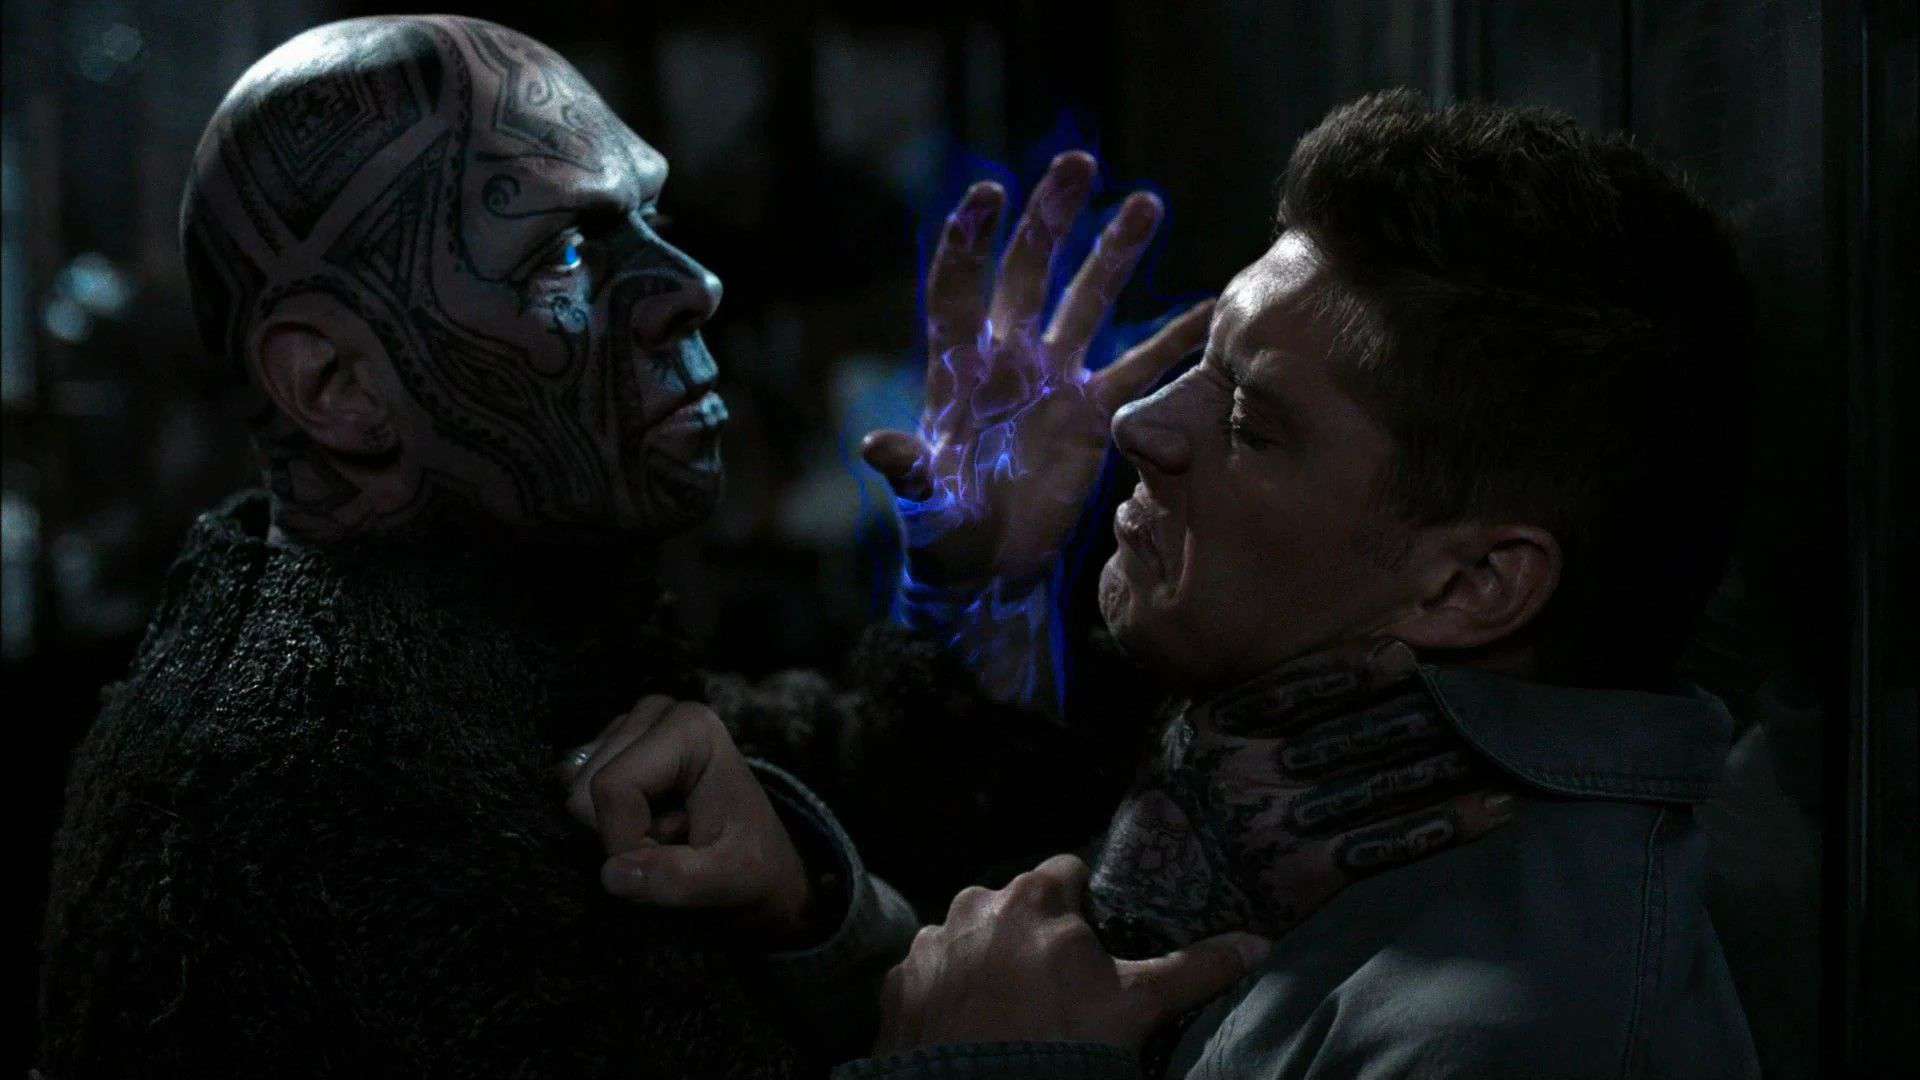 Mackenzie Gray holds a glowing blue hand to Jensen Ackles' face in this image from Warner Bros. Television.